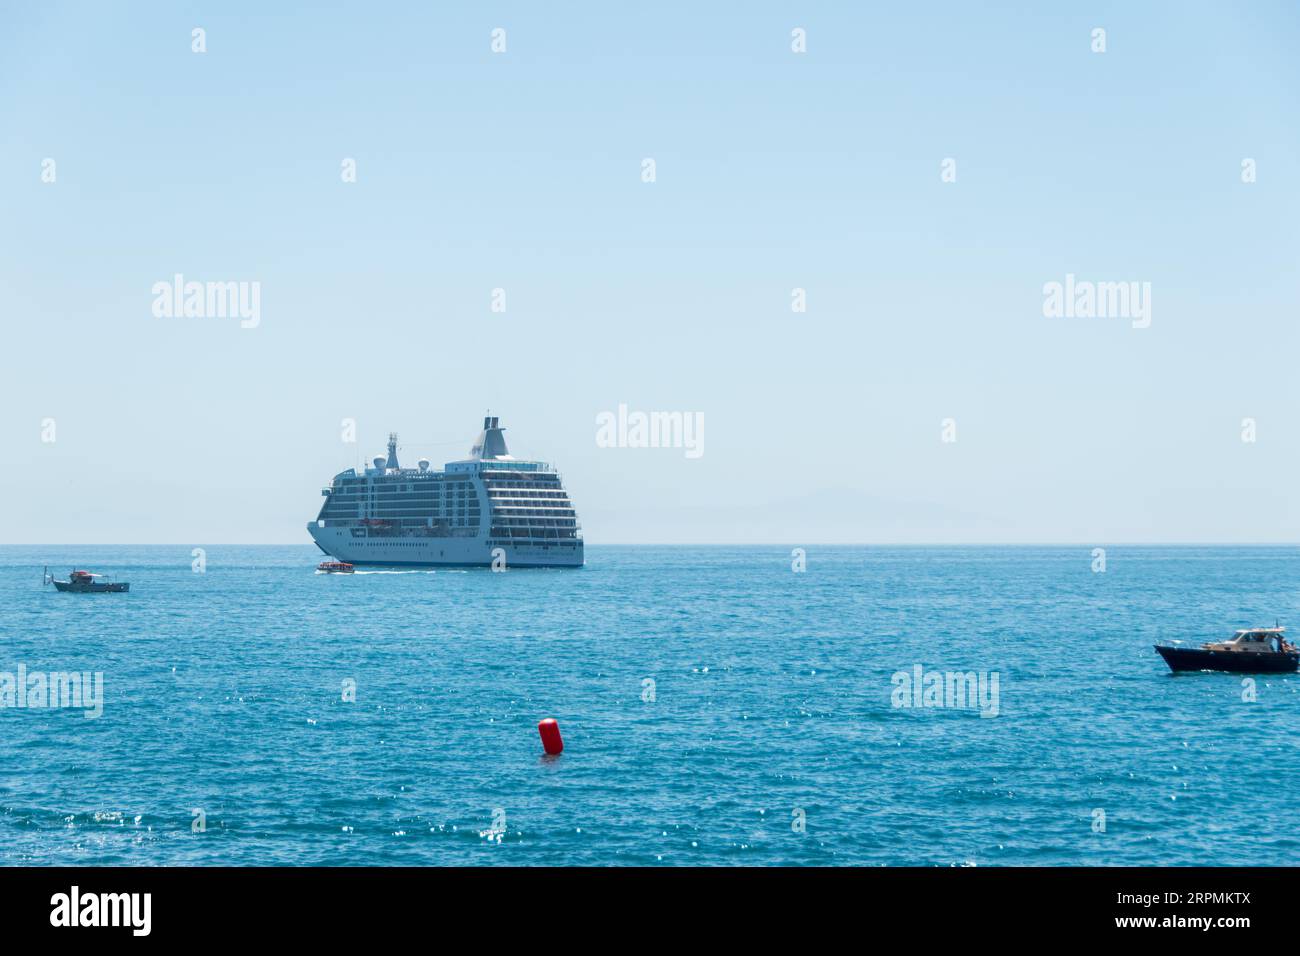 A Cruise Ship As Seen From The Amalfi Harbor, Italy Stock Photo